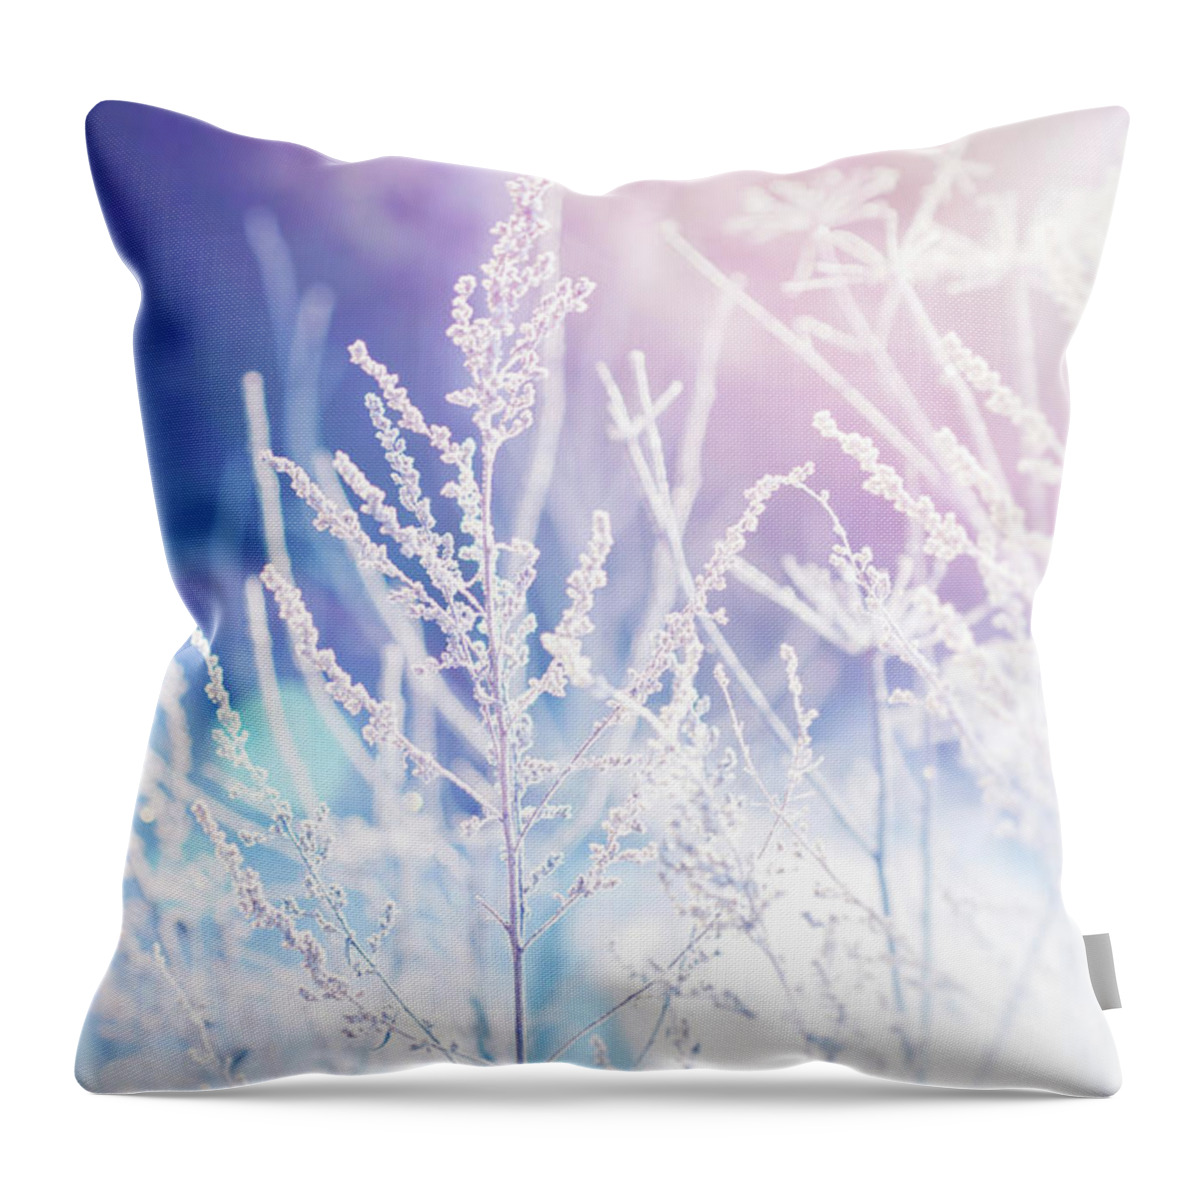 Scenics Throw Pillow featuring the photograph Frost On A Herb At Sunrise, Shallow by 5ugarless